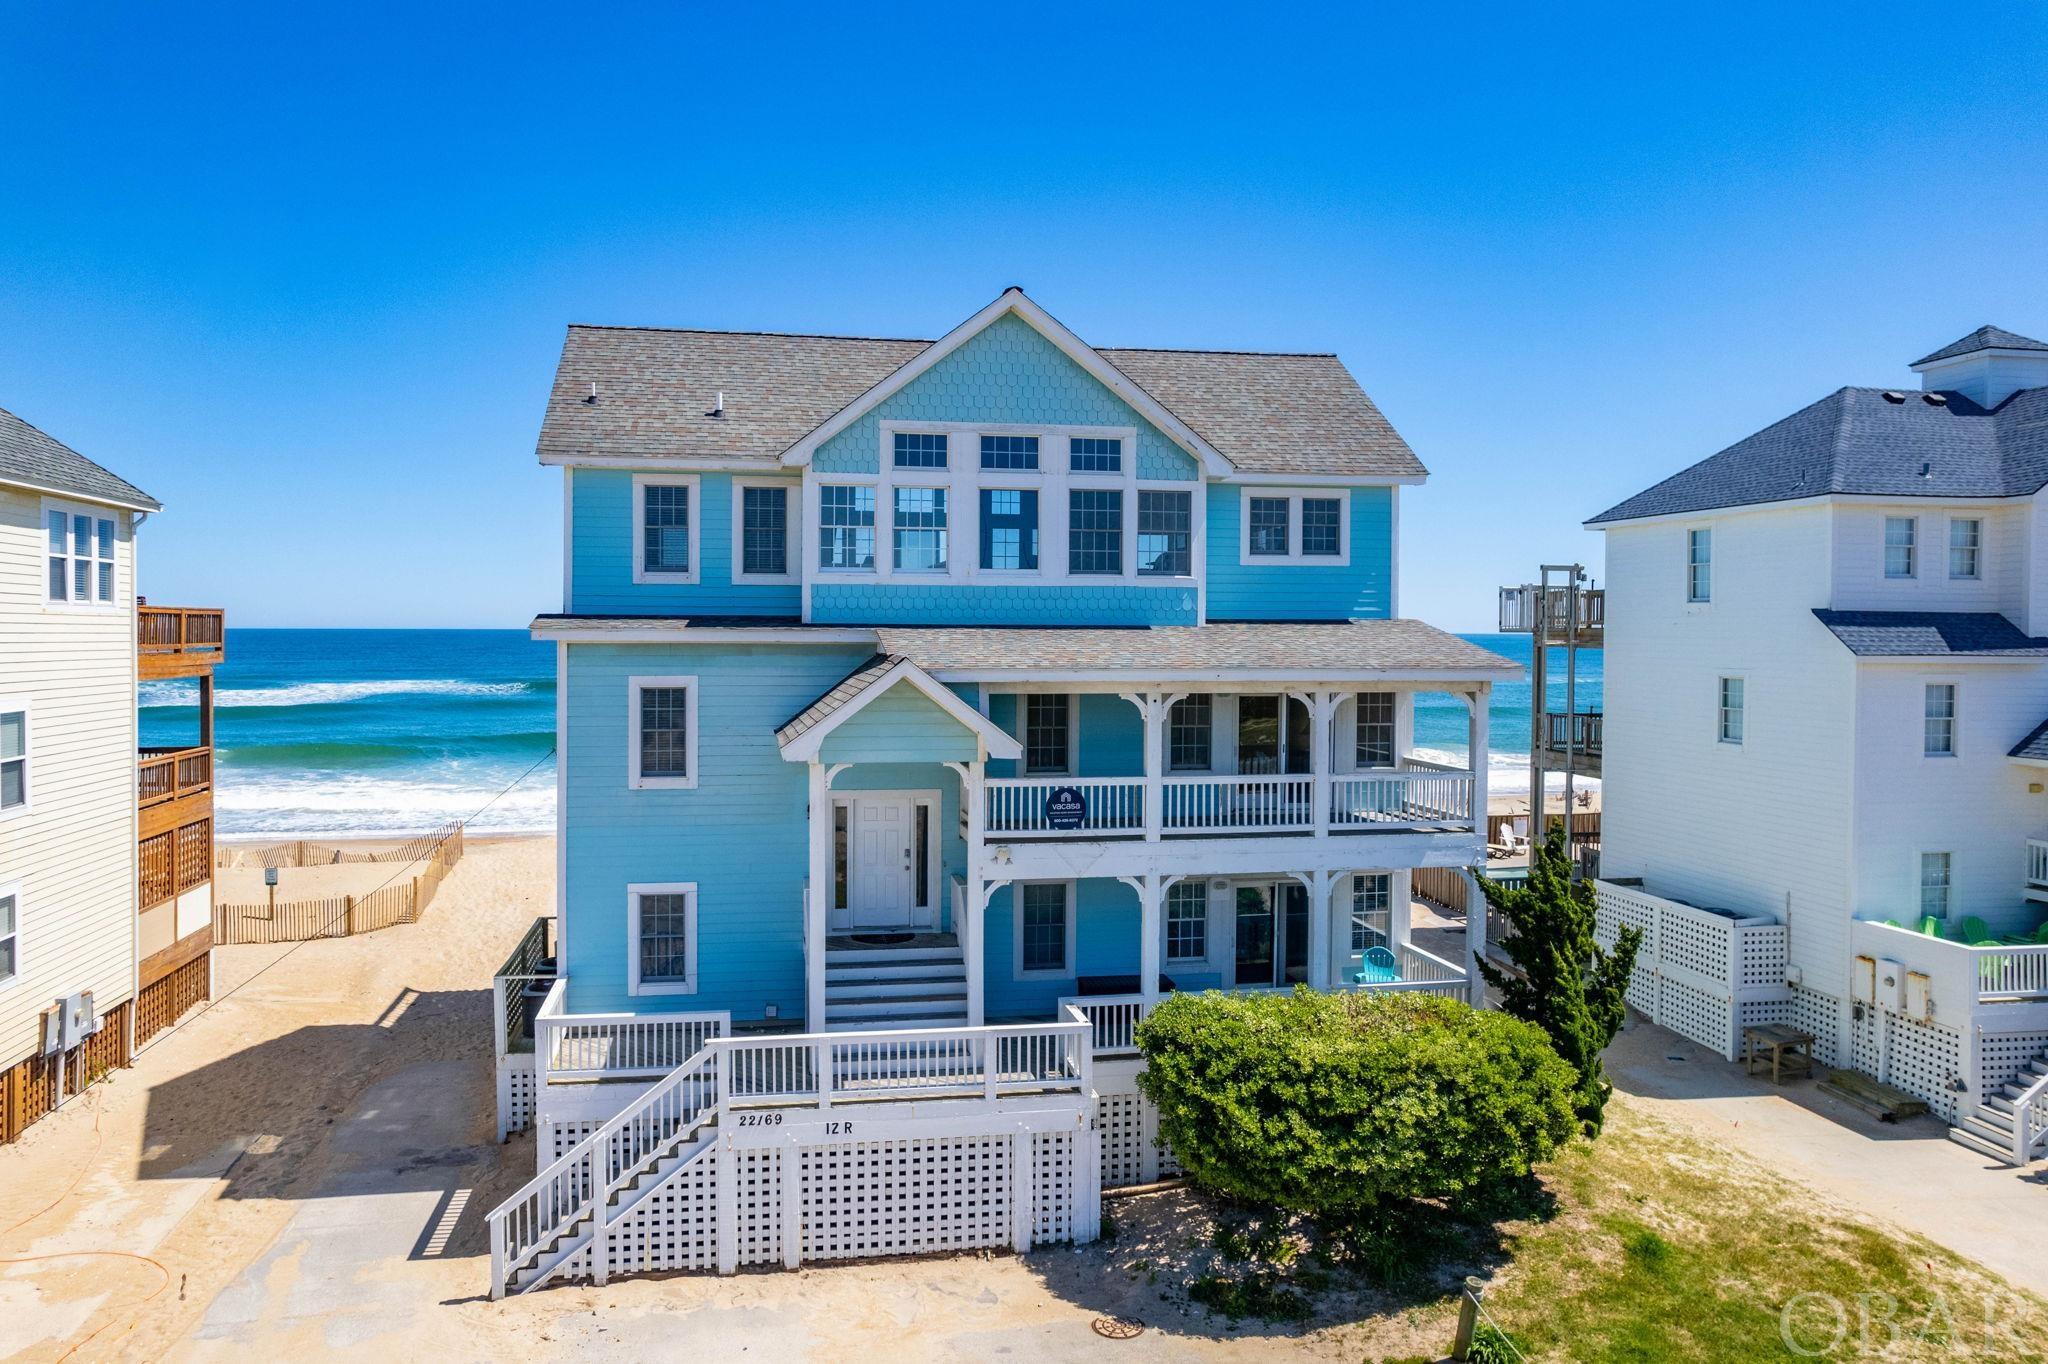 Located in the coastal town of Rodanthe, this 3300+ square foot oceanfront home boasts 7 bedrooms, 6.5 bathrooms, a game room with kitchenette, movie room, private pool, and most importantly panoramic ocean views! With ocean views from all levels, this open floor plan home features a spacious great room with cathedral ceilings, a recently remodeled kitchen with granite counters and stainless steel appliances, along with a breakfast island and pantry, while the adjoining dining area offers a picturesque setting for every meal.  The opposite side of the room offers incredible sunset views from a wall of mullioned windows and another seating area. Also on this level is an en suite bedroom with a private bathroom, ensuring the privacy and convenience of a reverse floor plan. On the middle level, there are four additional bedrooms, two of which are en suite bedrooms with private bathrooms, providing convenience and luxury for guests.  One en suite offers covered deck access to the west for sound views, and the other enjoys ocean front covered deck access. Two guestrooms share ocean side deck access and a Jack and Jill bathroom.  Vacationers appreciate this configuration as it offers plenty of space and a variety of sleeping options. The ground floor of Sun Runner is dedicated to entertainment and leisure, featuring a spacious game room with a kitchenette, a movie room, and two more guestrooms. The game room has ocean front deck access, offering more stunning ocean views, as does the pyramid bunk room.  A full bath is shared by this room and is accessible from the game room.  Another guest room enjoys front deck access and connects to a full bathroom, also accessible from the game room. Step outside to find the hot tub area and oceanfront pool, where guests can unwind after a day of beach-combing or simply revel in the soothing sounds of the waves. With its prime location, comprehensive amenities, and emphasis on breathtaking ocean views, Sun Runner promises a vacation experience to remember.